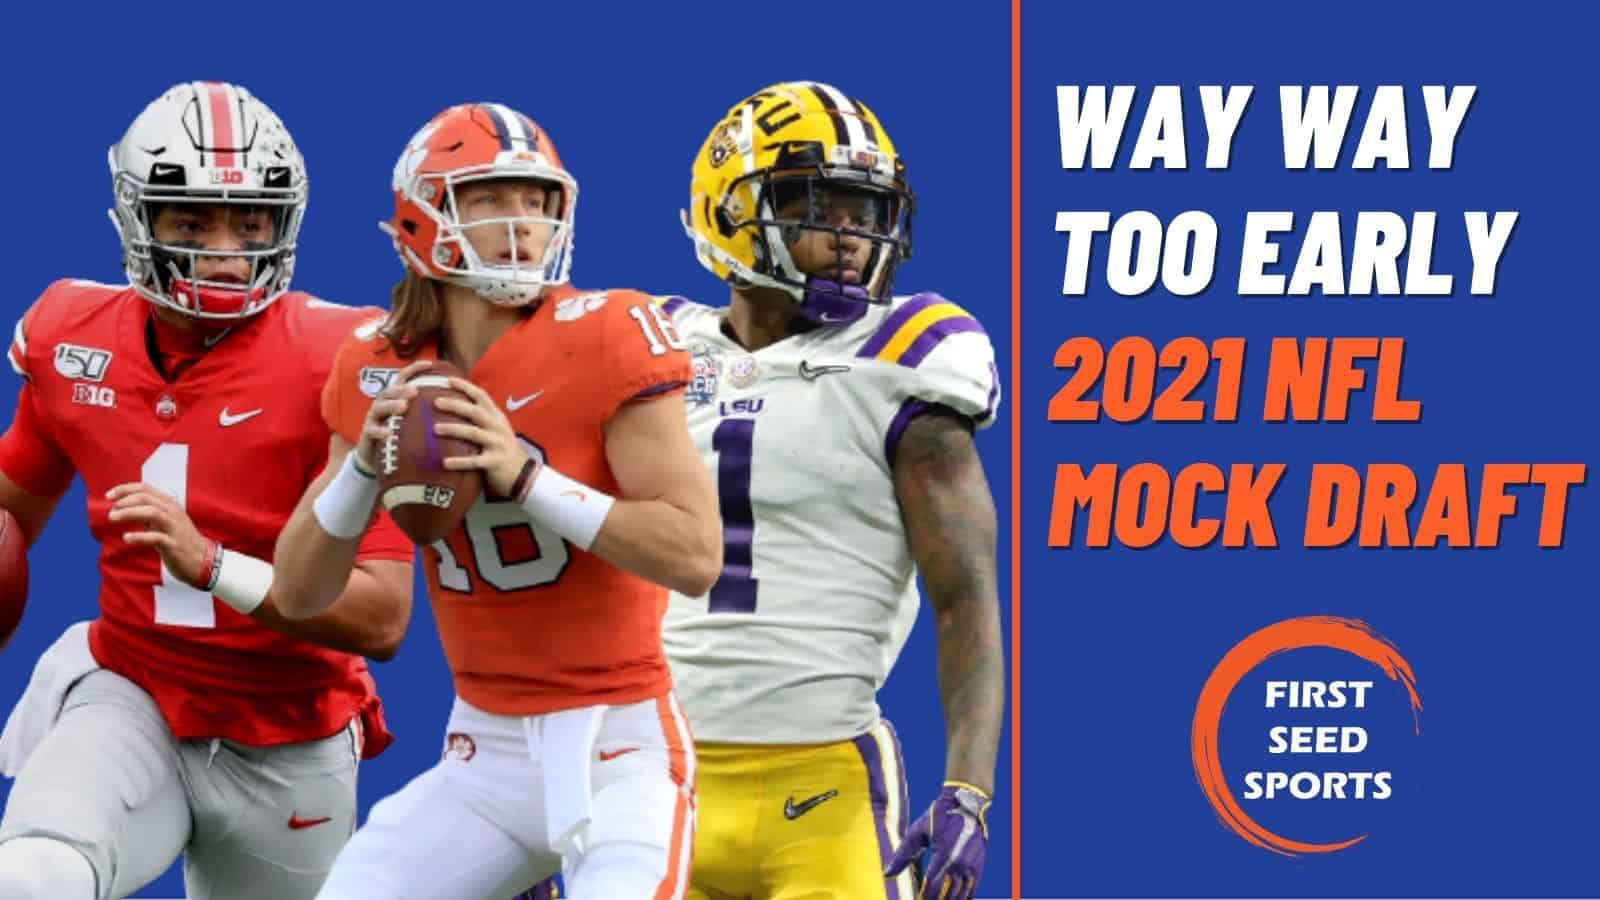 The Way Way Too Early 2021 NFL Mock Draft - First Seed Sports